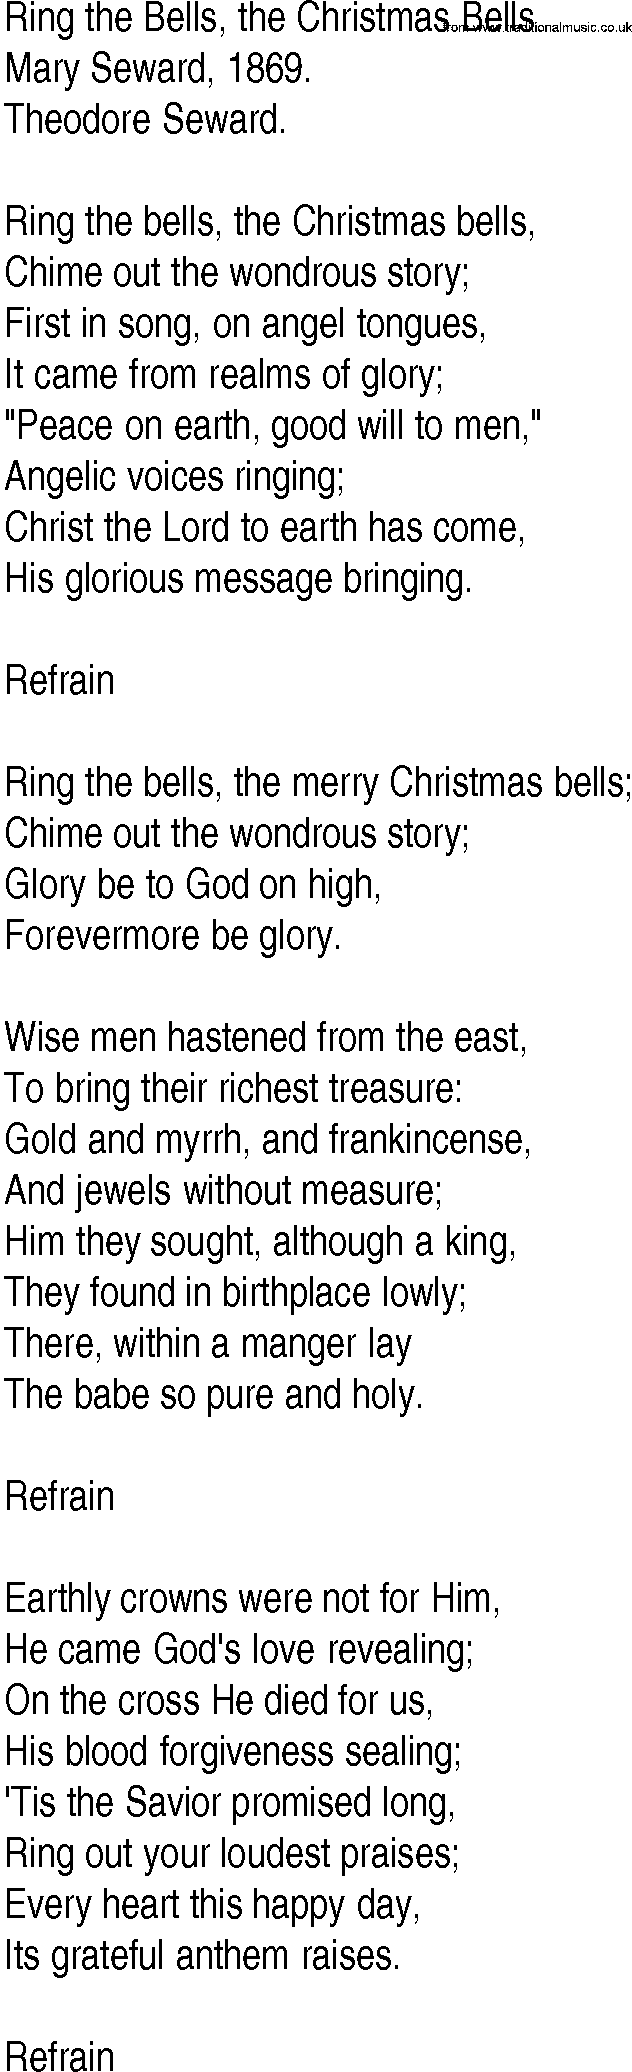 Hymn and Gospel Song Lyrics for Ring the Bells, the Christmas Bells by Mary Seward